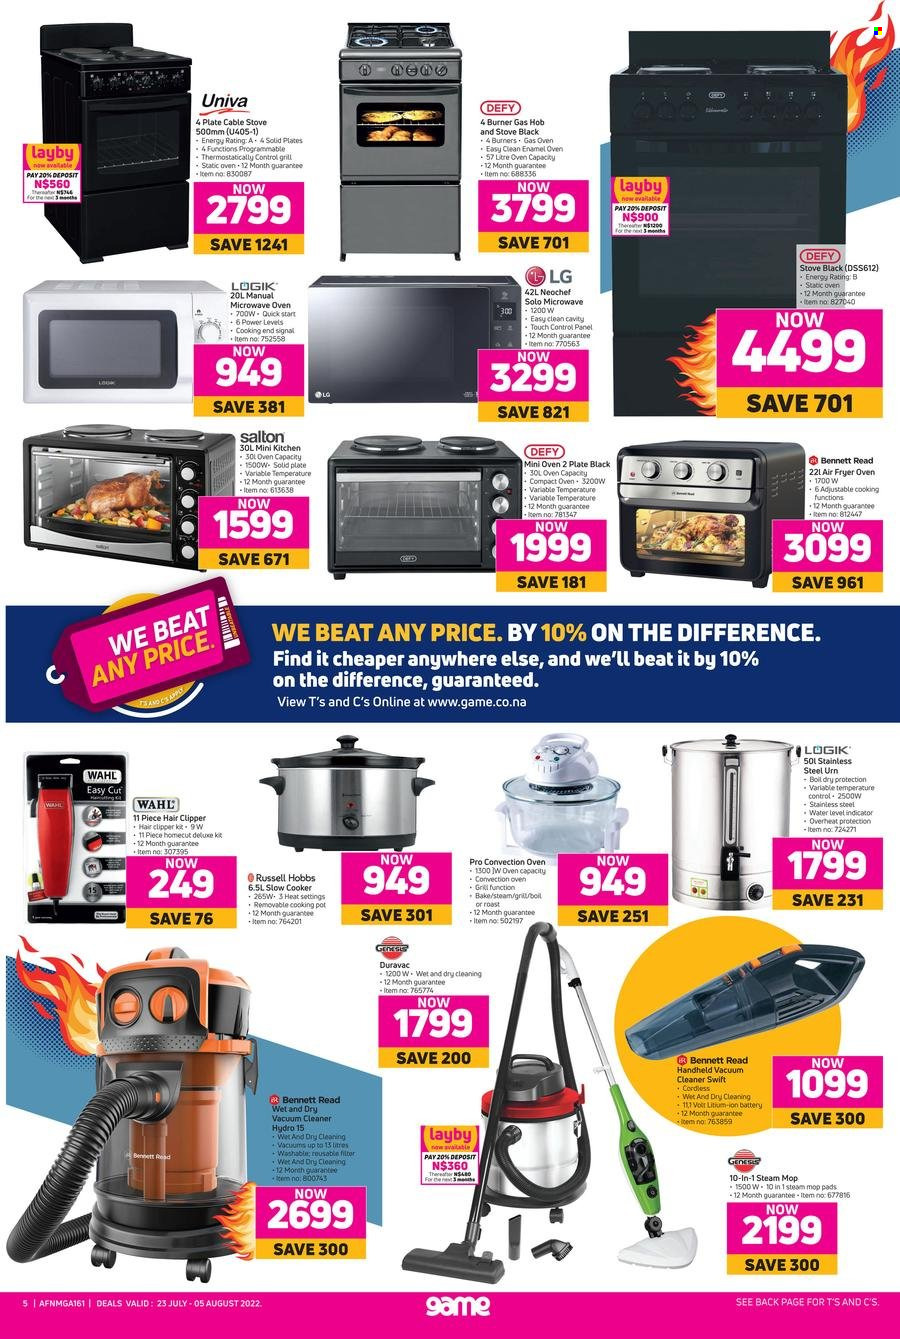 Game catalogue  - 23/07/2022 - 05/08/2022 - Sales products - Signal, pot, plate, LG, oven, convection oven, compact oven, microwave, hob, vacuum cleaner, Bennett Read, handheld vacuum cleaner, slow cooker, Russell Hobbs, mini-kitchen. Page 5.